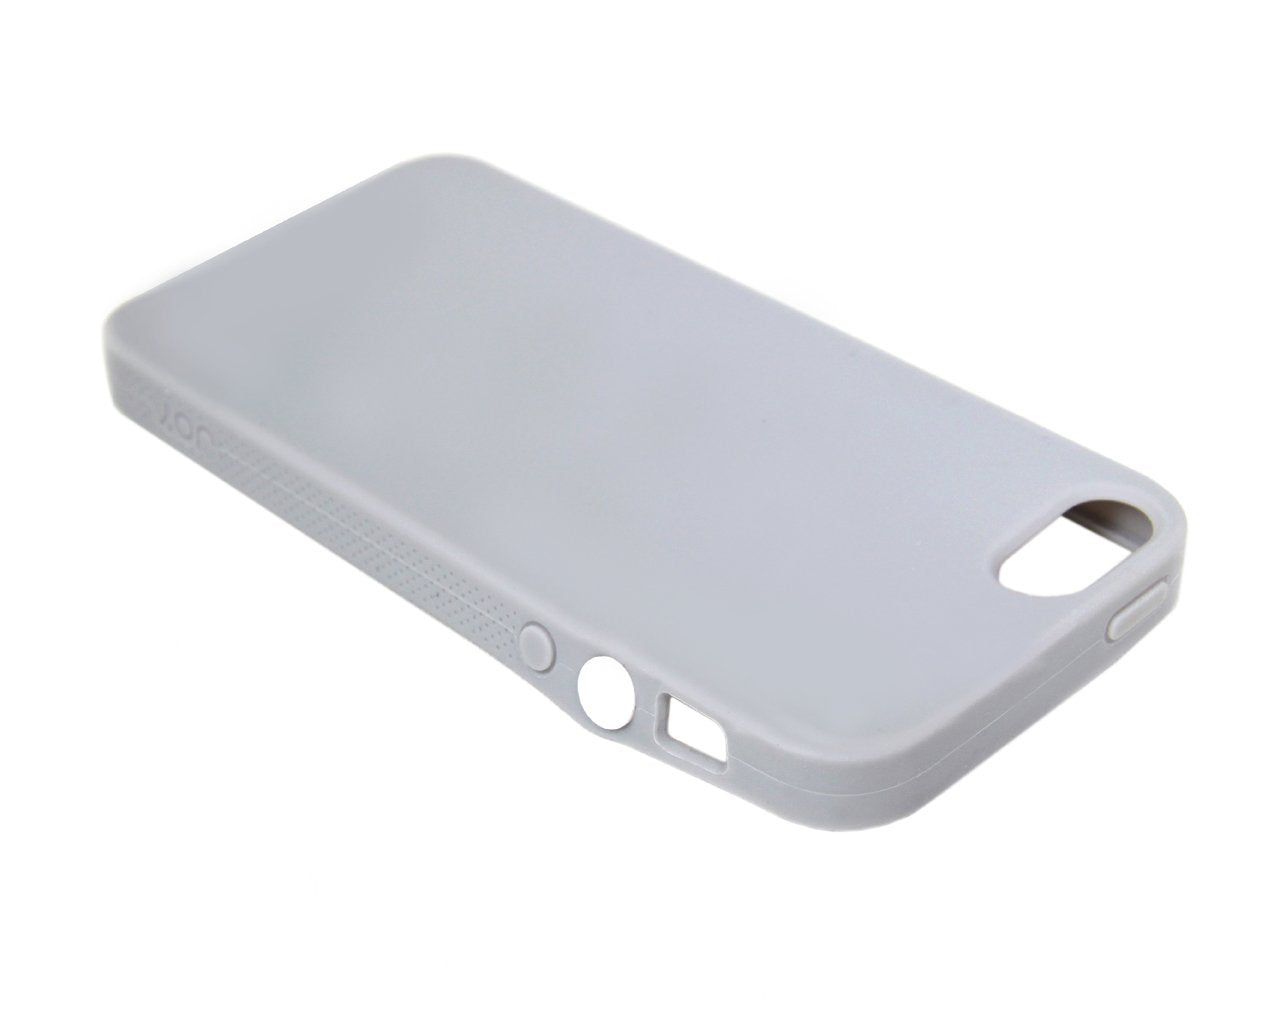 The Joy Factory Jugar Soft Silicone Case with Metal Frame for iPhone5/5S, CSD101 (Gray)